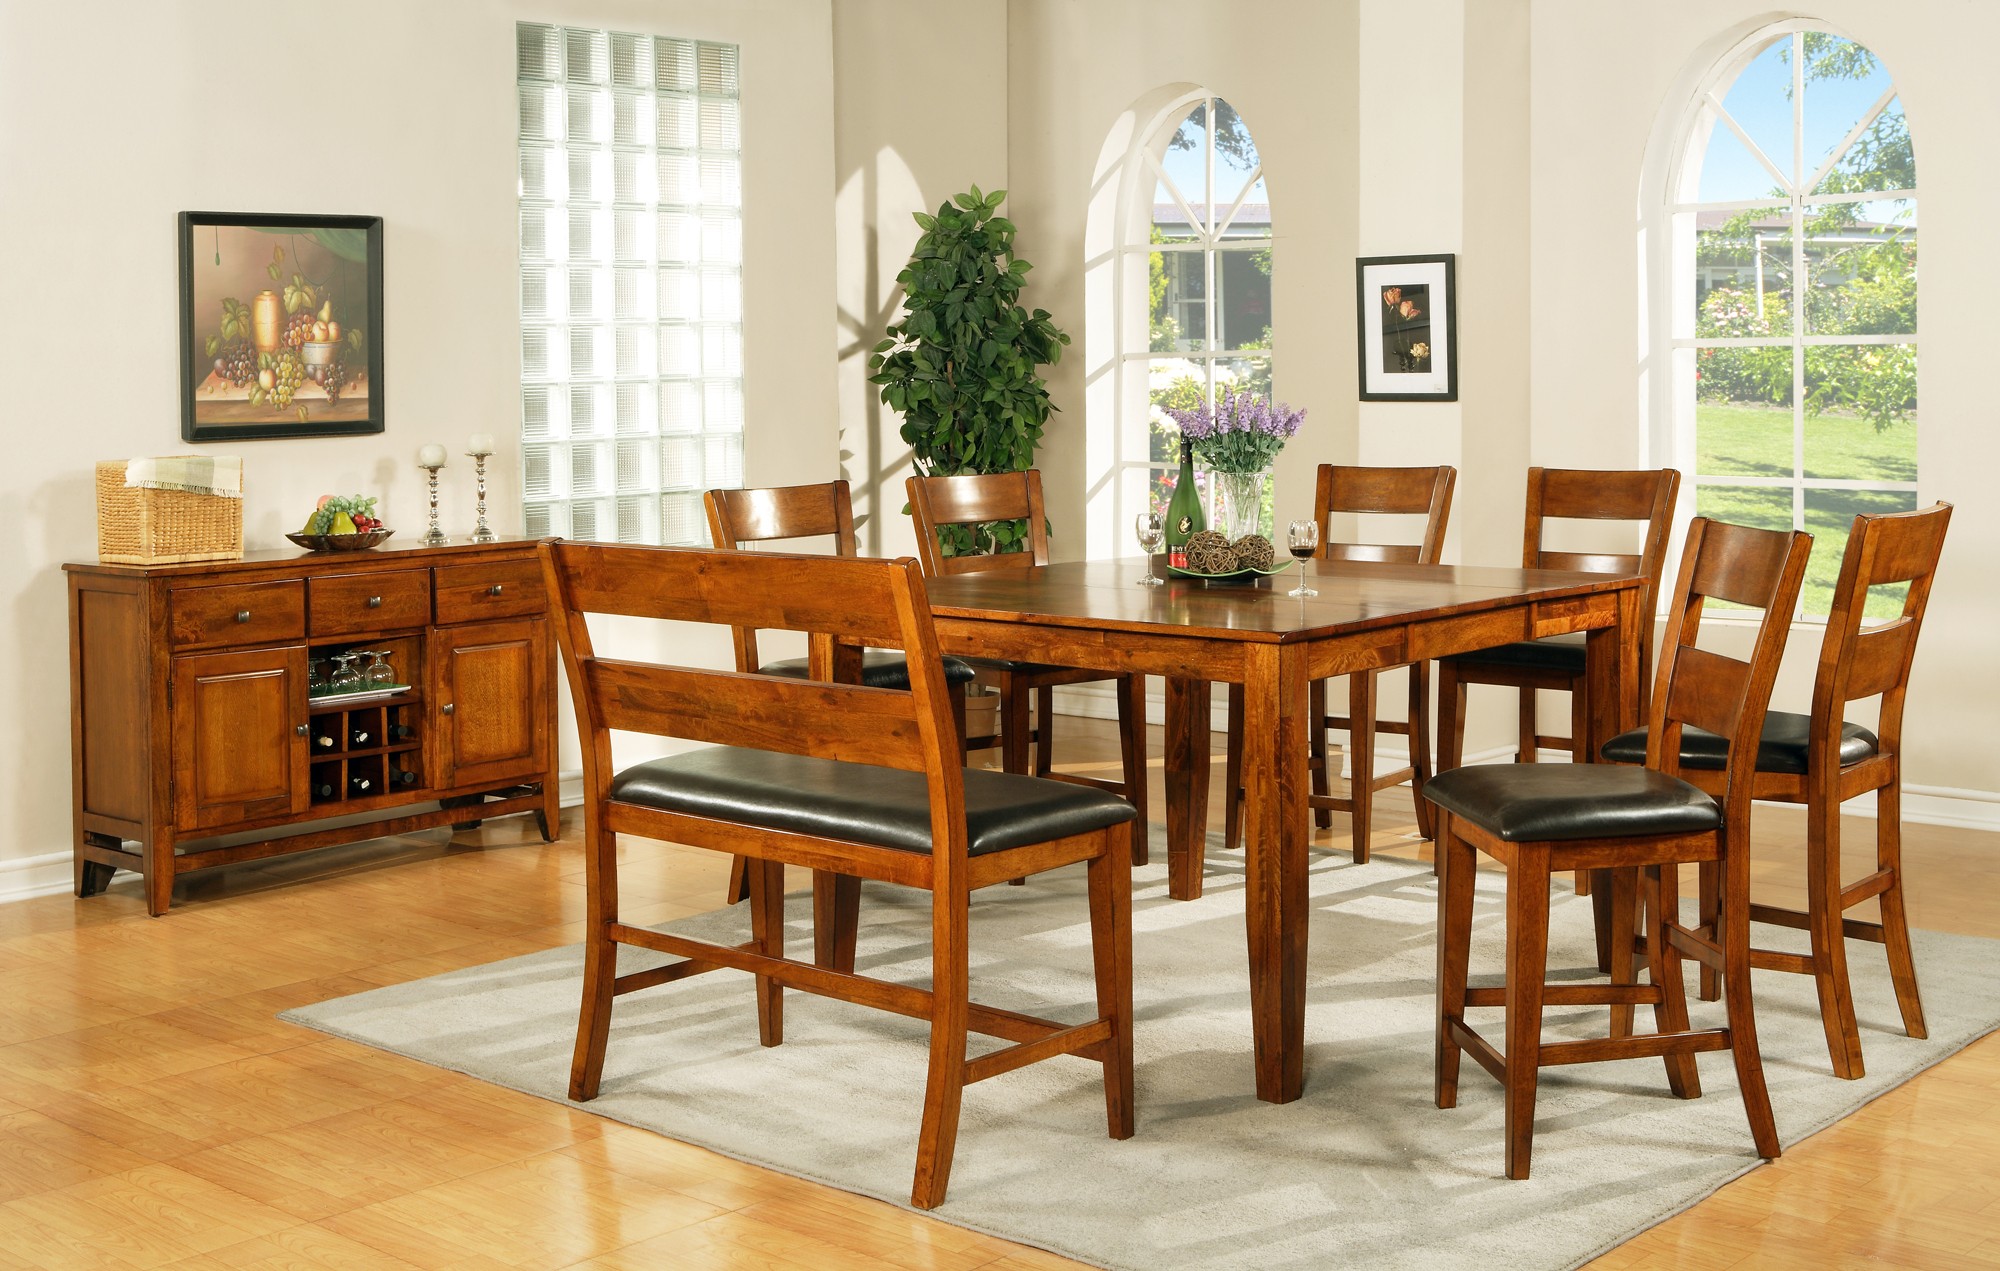 Todays trend is toward counter height dining with eco friendly